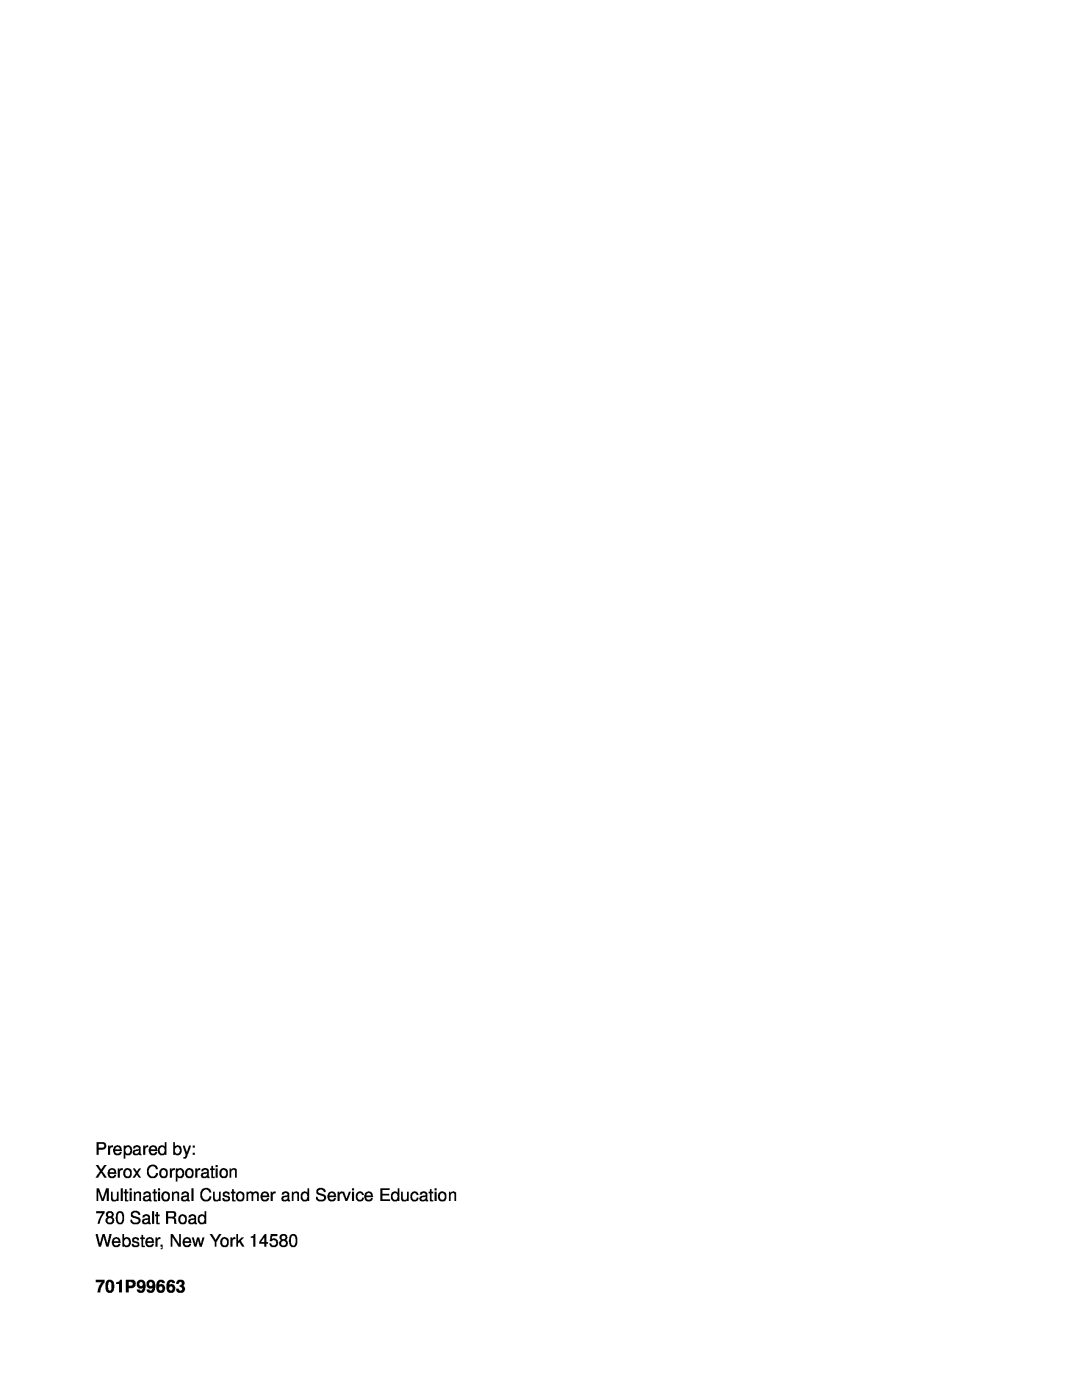 Xerox a2 manual Prepared by: Xerox Corporation, Webster, New York, 701P99663 